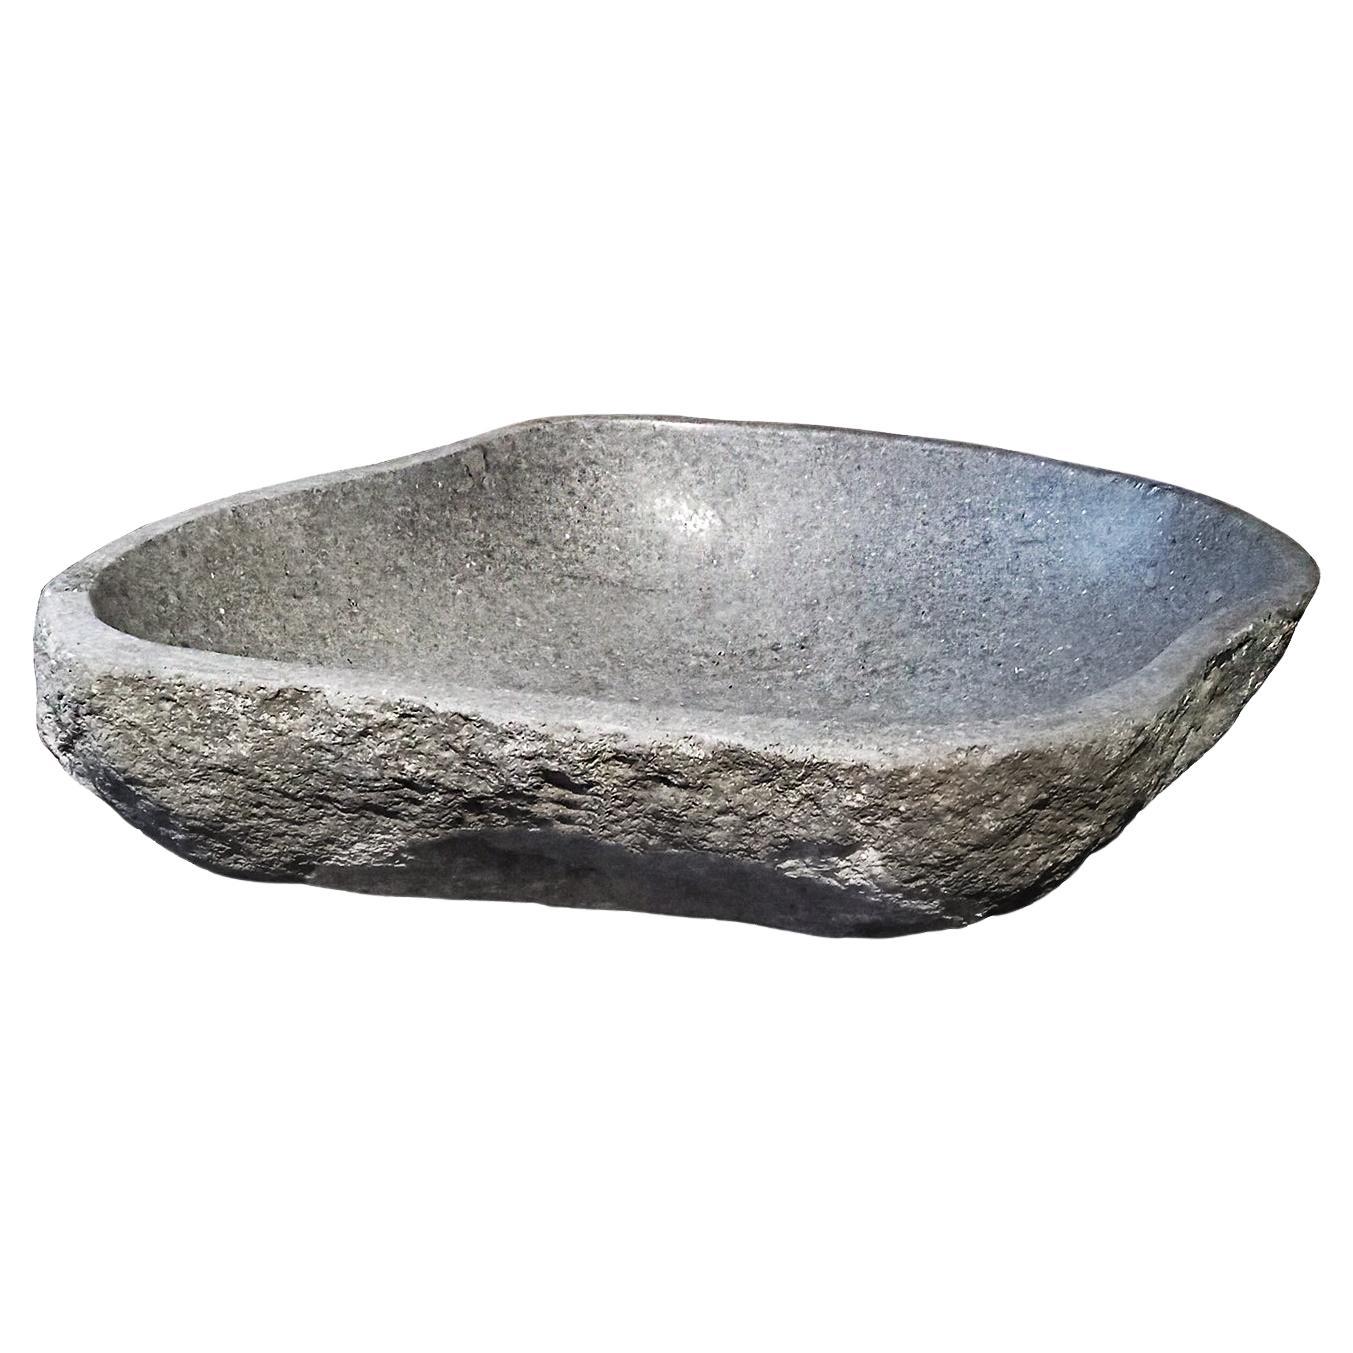 Stone Sink or Basin from Indonesia